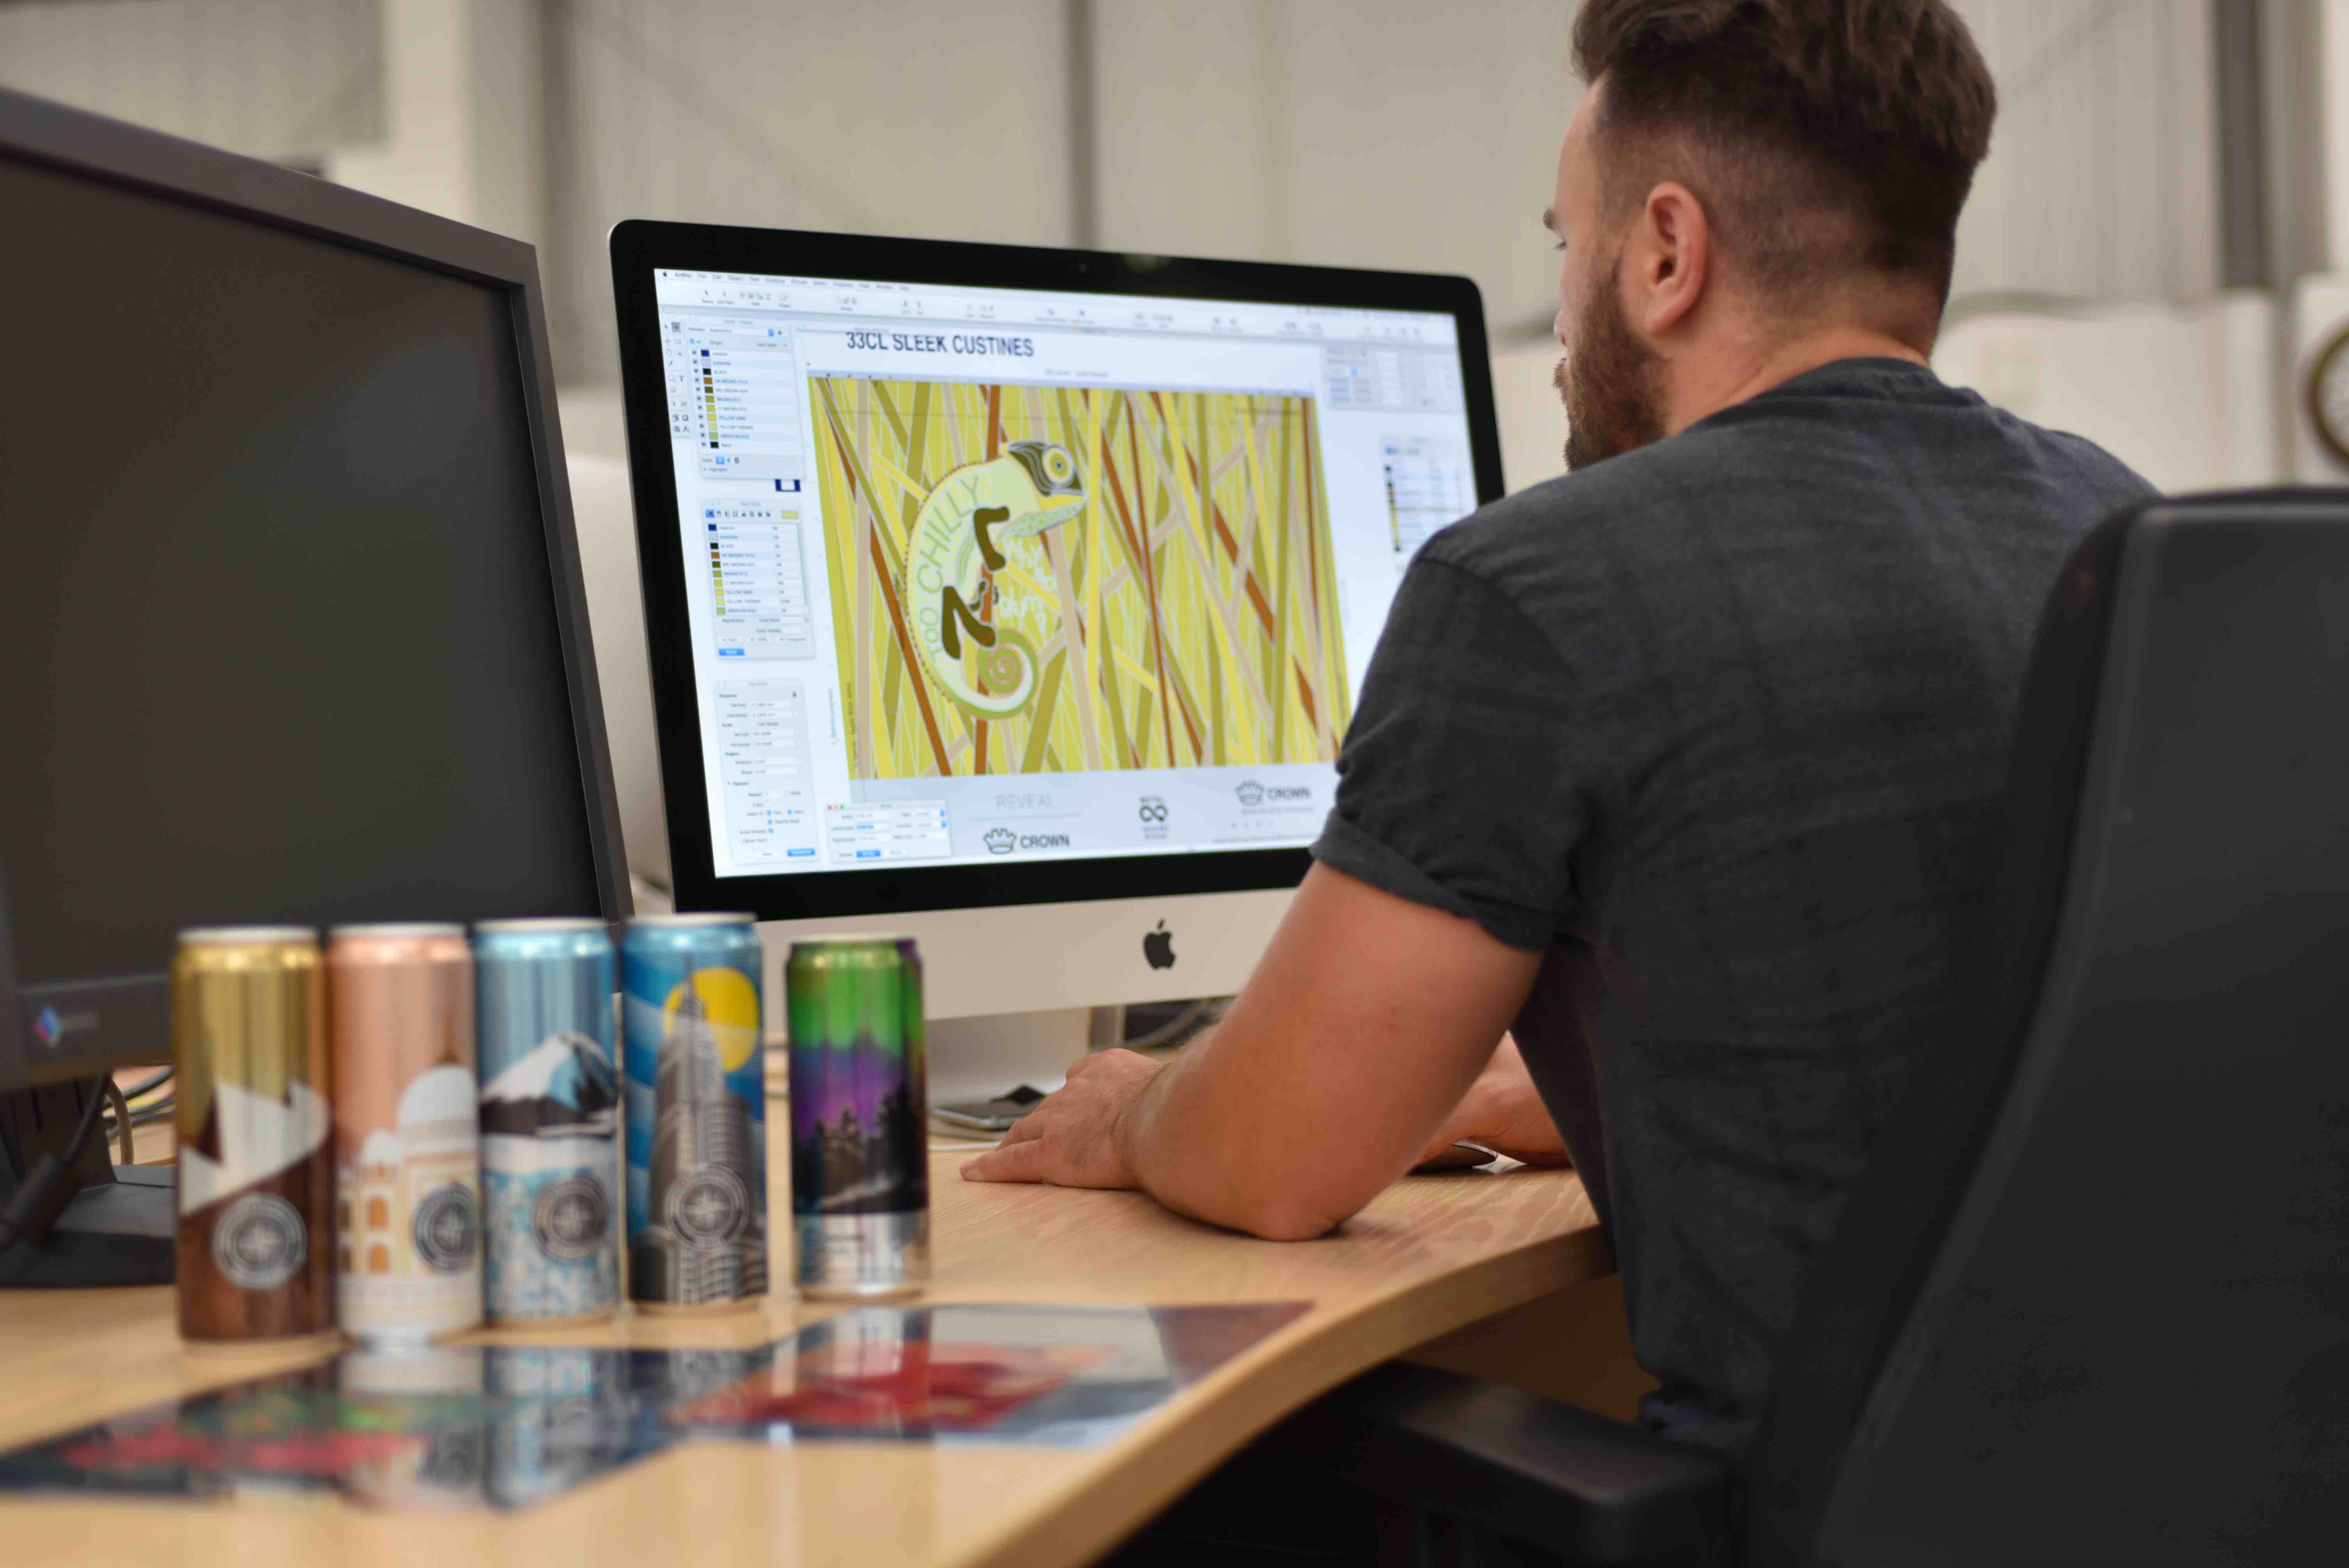 Male presenting person sits at a desk on a computer. Working on artwork for various cans. 